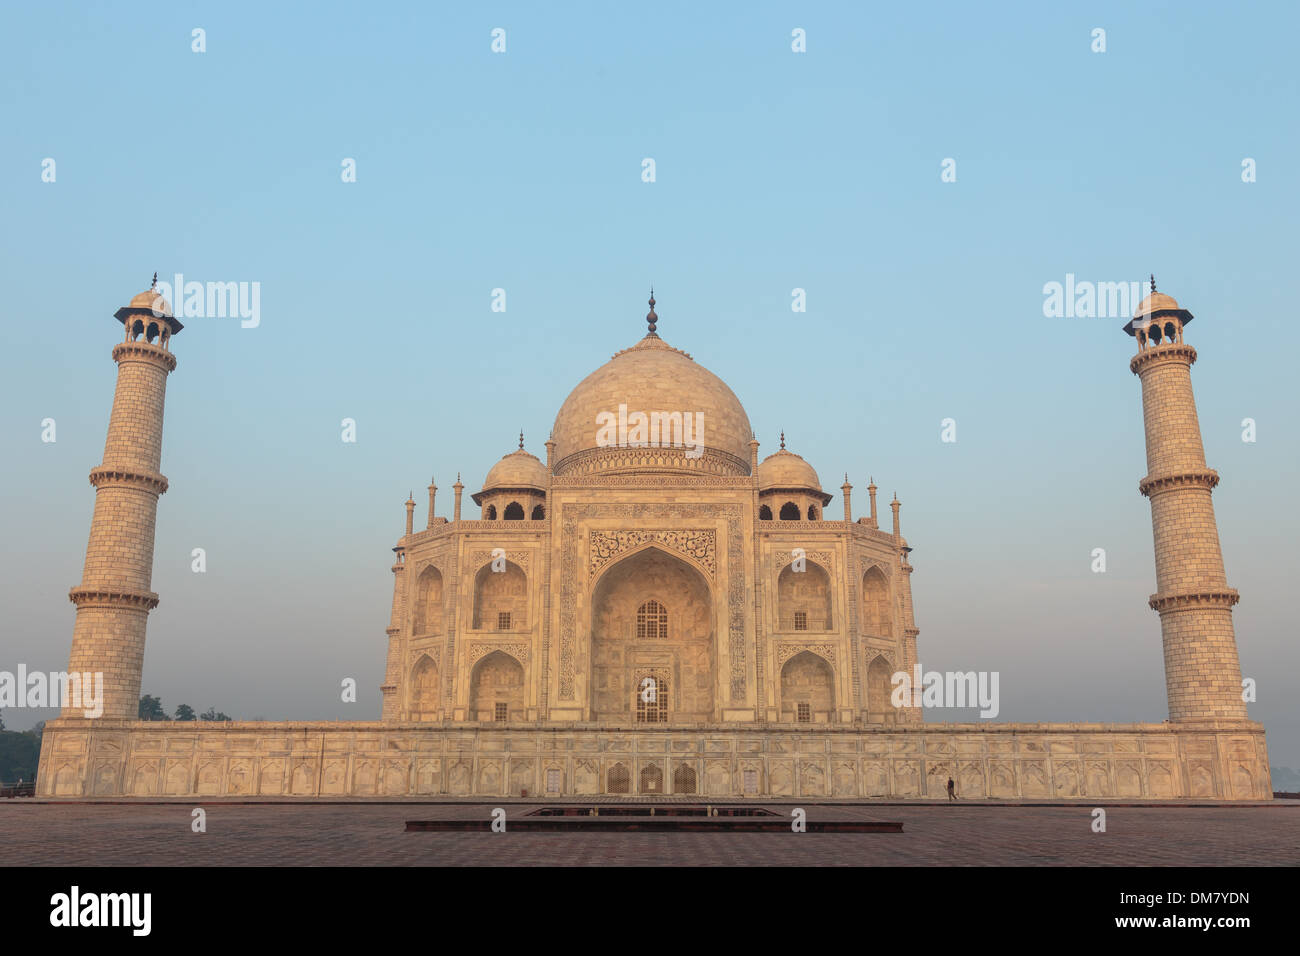 The stunning indo-islamic architecture of the Taj Mahal is complimented by the soft sunrise light over the palace in Agra, India. Stock Photo